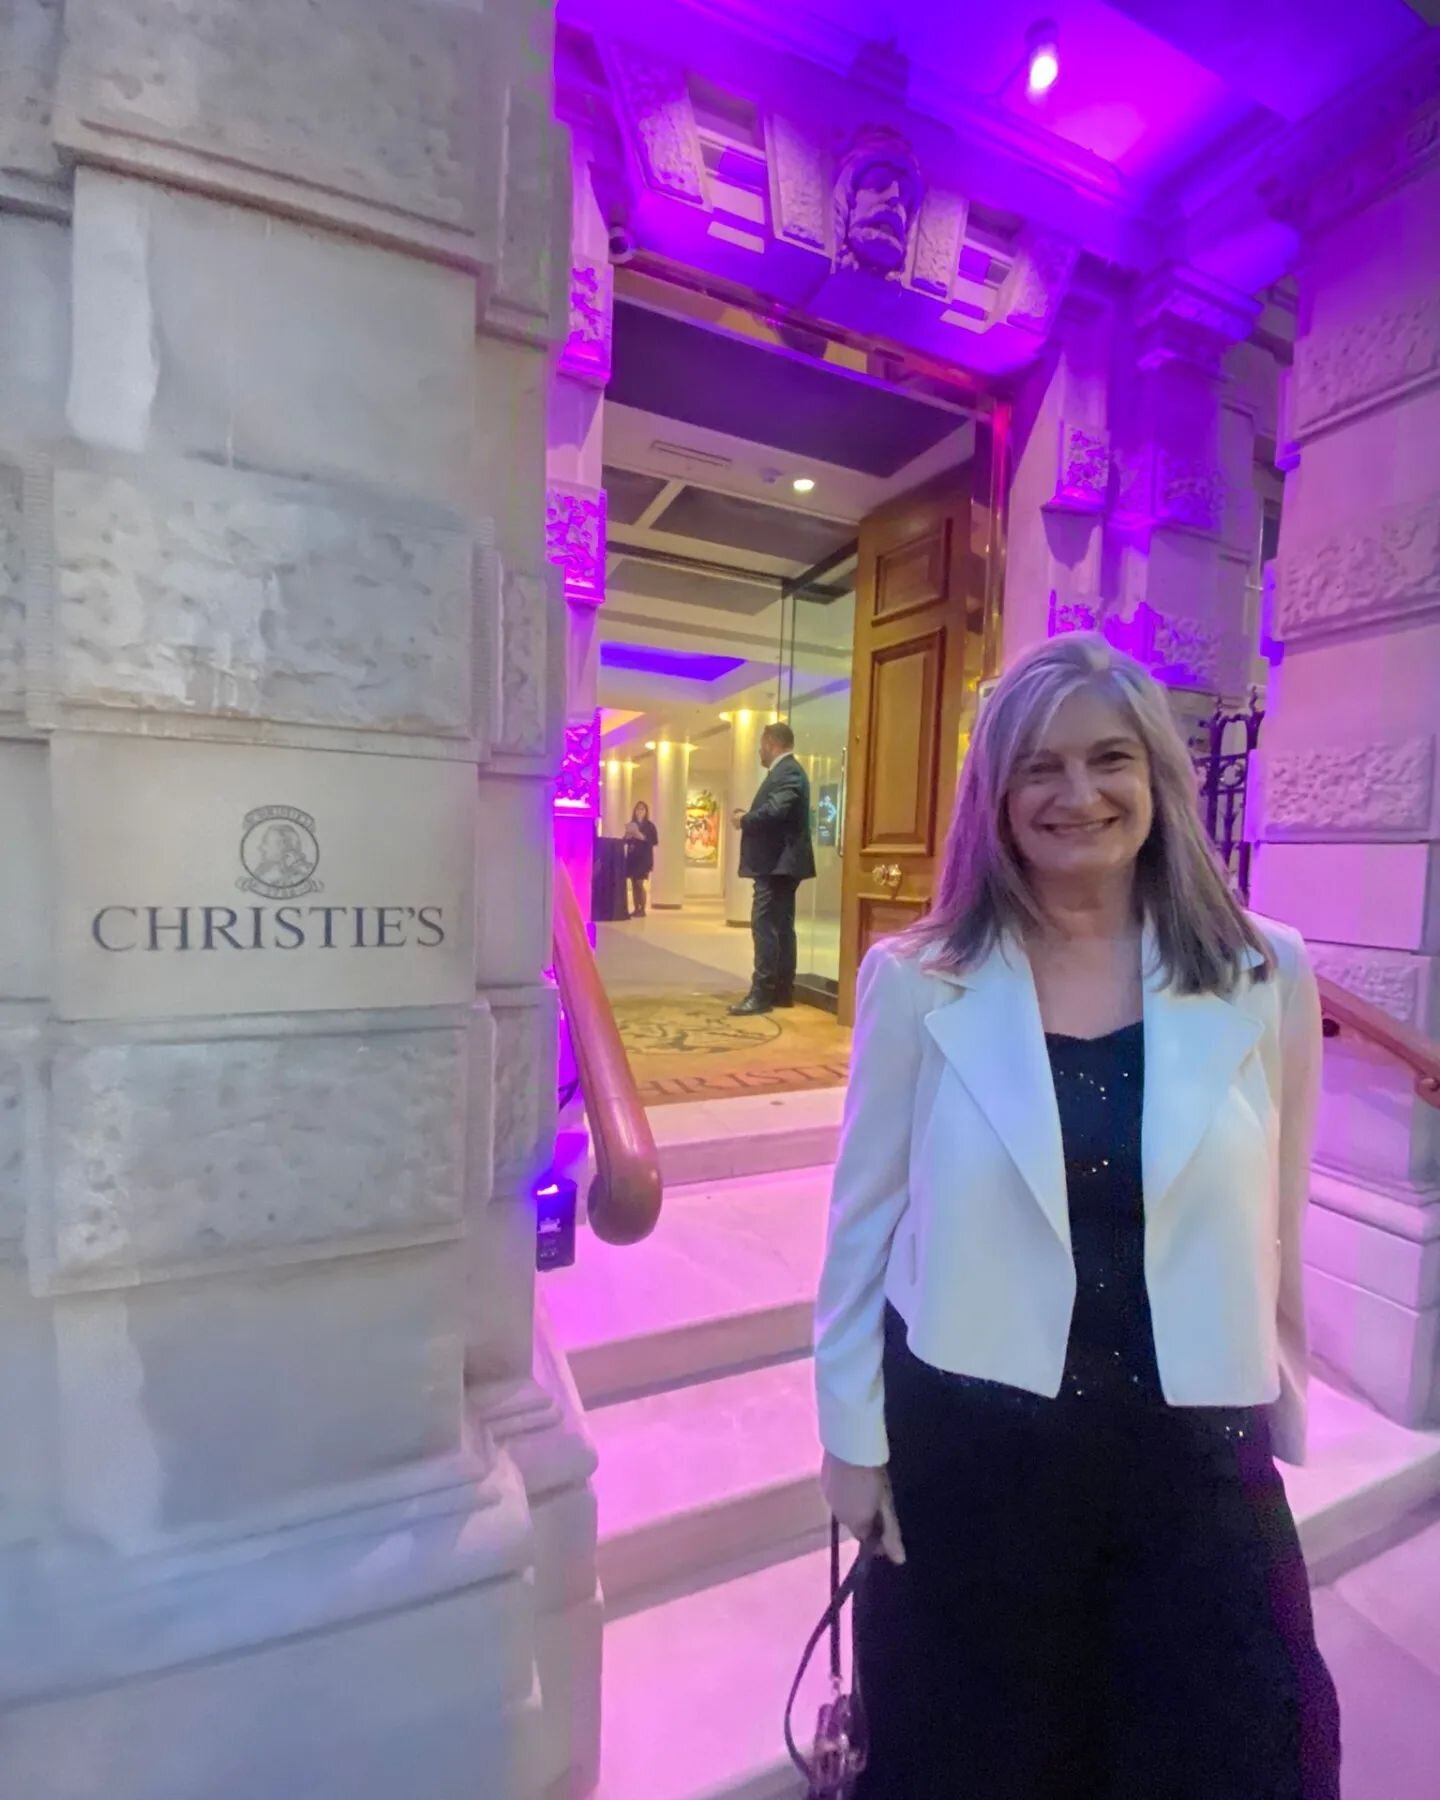 Had a fabulous time at&nbsp;@christiesinc&nbsp;Cocktail Reception looking at thought-provoking art and meeting the wonderful women behind @artofwishes who are&nbsp;working so tirelessly to raise vital funds to grant magical wishes to critically ill c